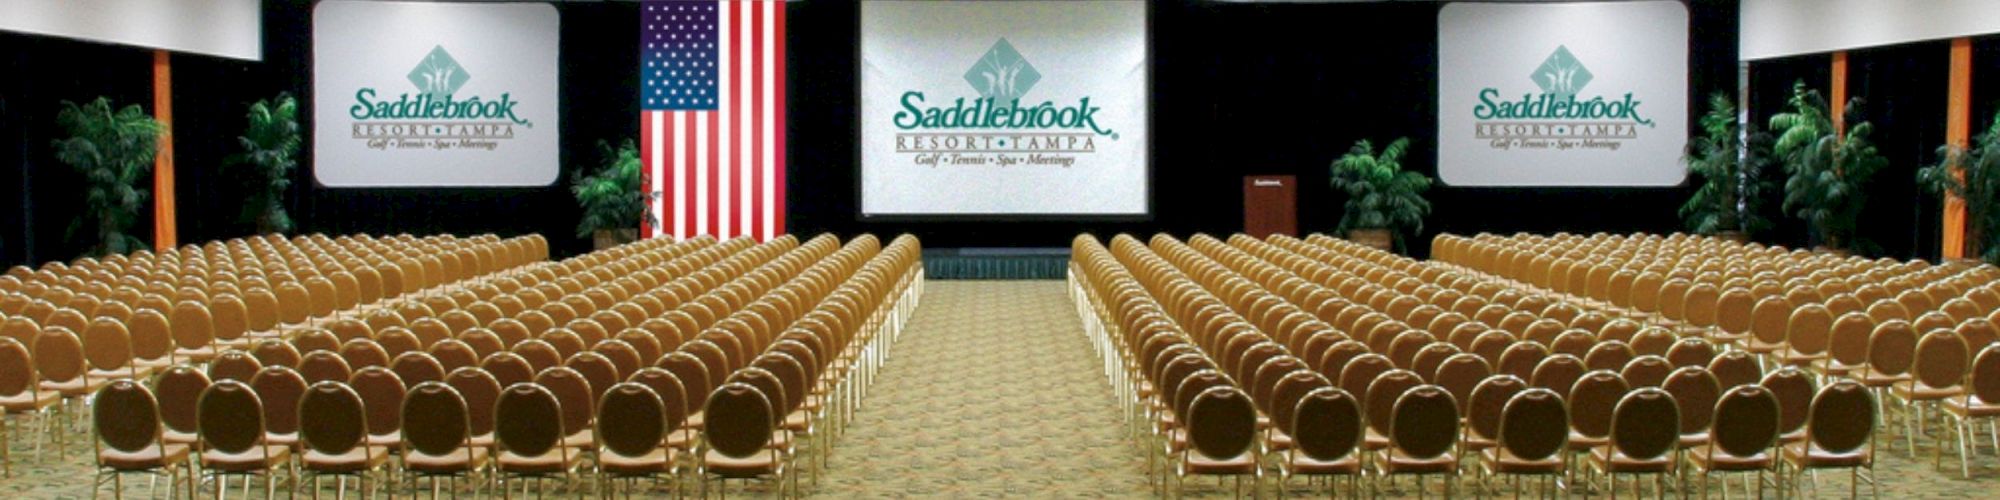 An empty conference room boasts rows of chairs facing a stage with screens, a U.S. flag, and branding for Saddlebrook Resort Tampa.